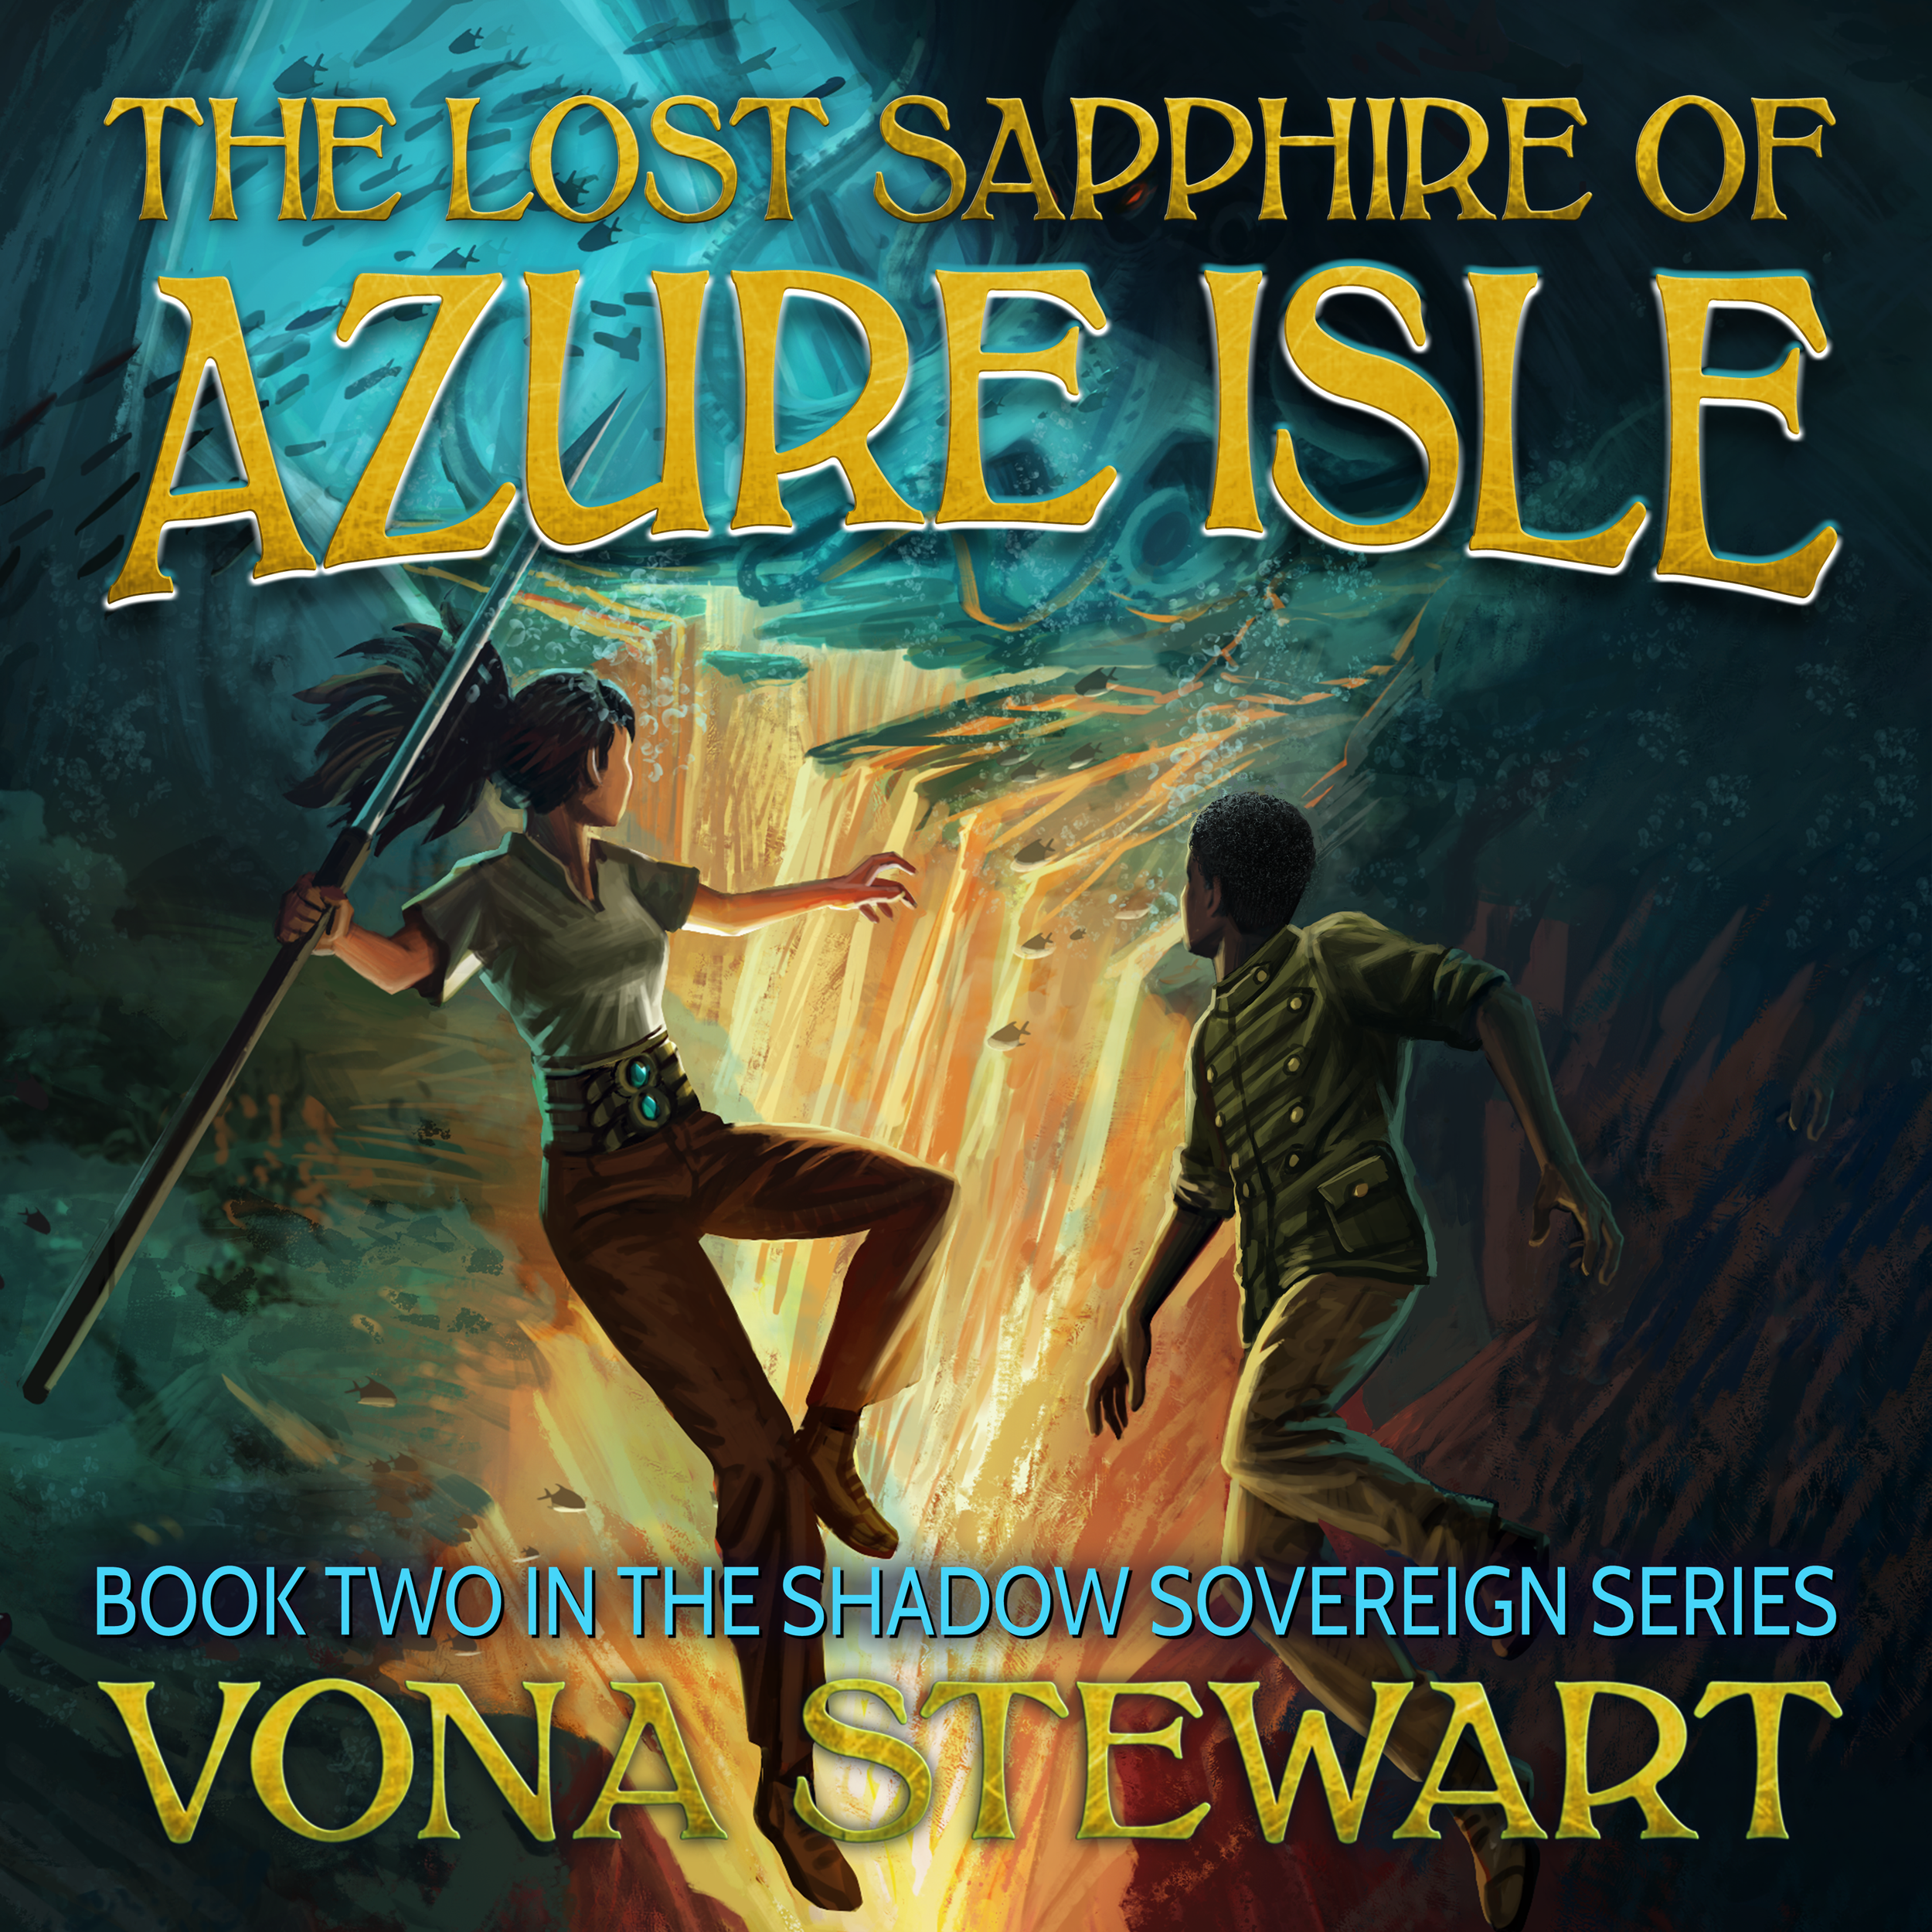 Audiobook Cover_Vona Stewart_The Lost Sapphire of Azure Isle.png